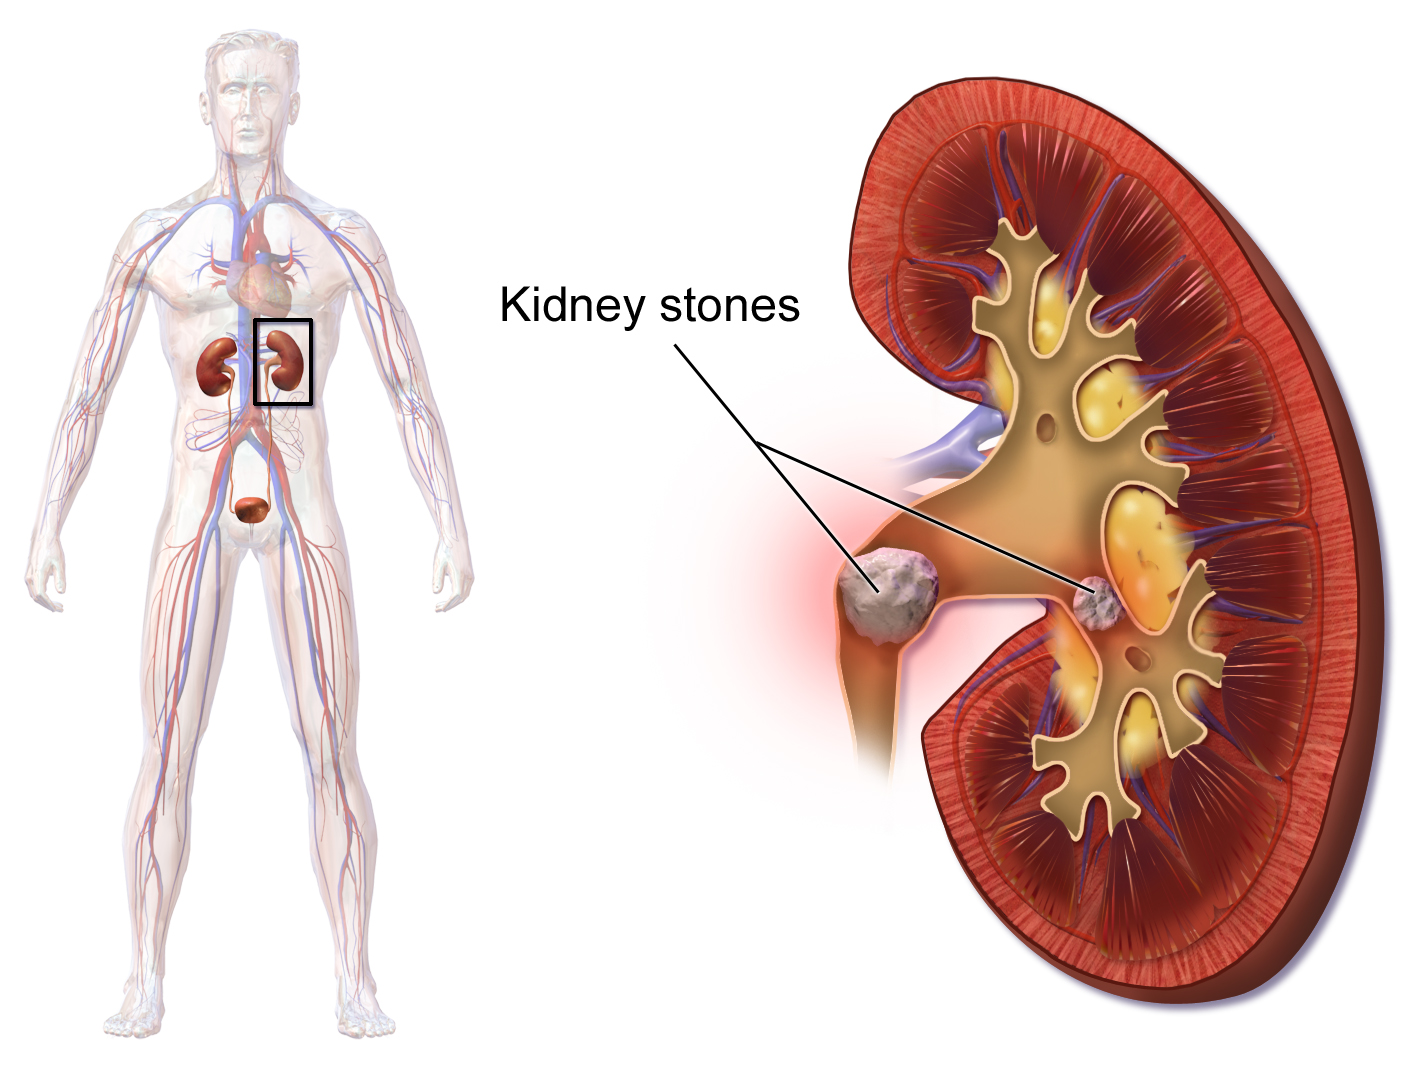 kidney stones || Will the mixture of cabbage and tomato lead to formation of kidney stones